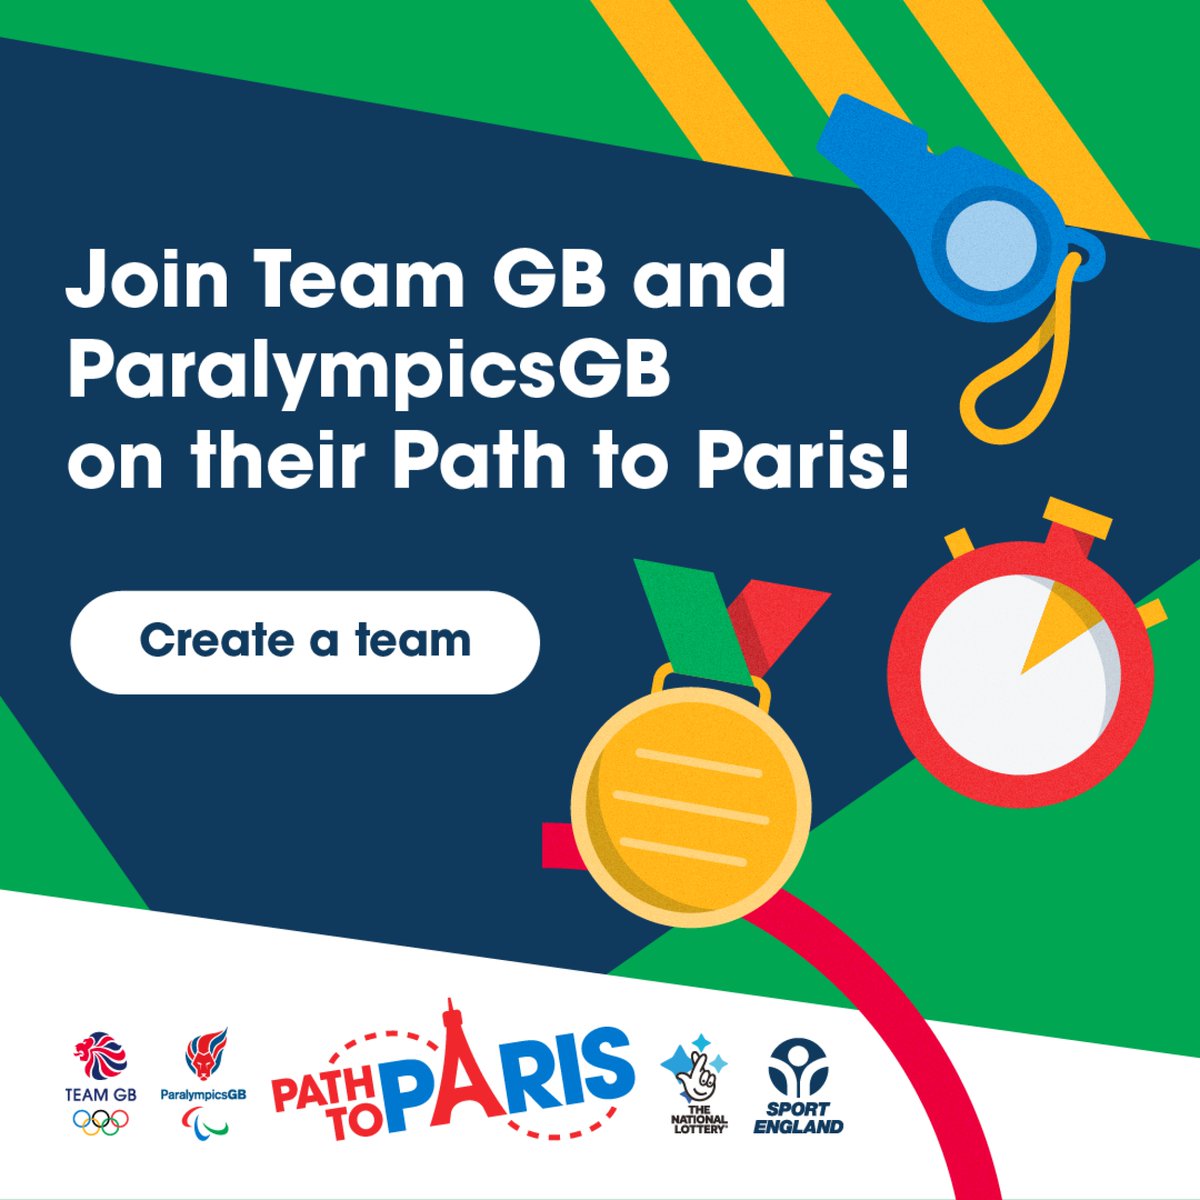 🏆 Did you know? Completing activities in #PathToParis could win your school amazing prizes like sports equipment and Olympic athlete visits! Join the fun and inspire your pupils. 🌟 @getsetcommunity 📣More info: hubs.ly/Q02vHGRK0